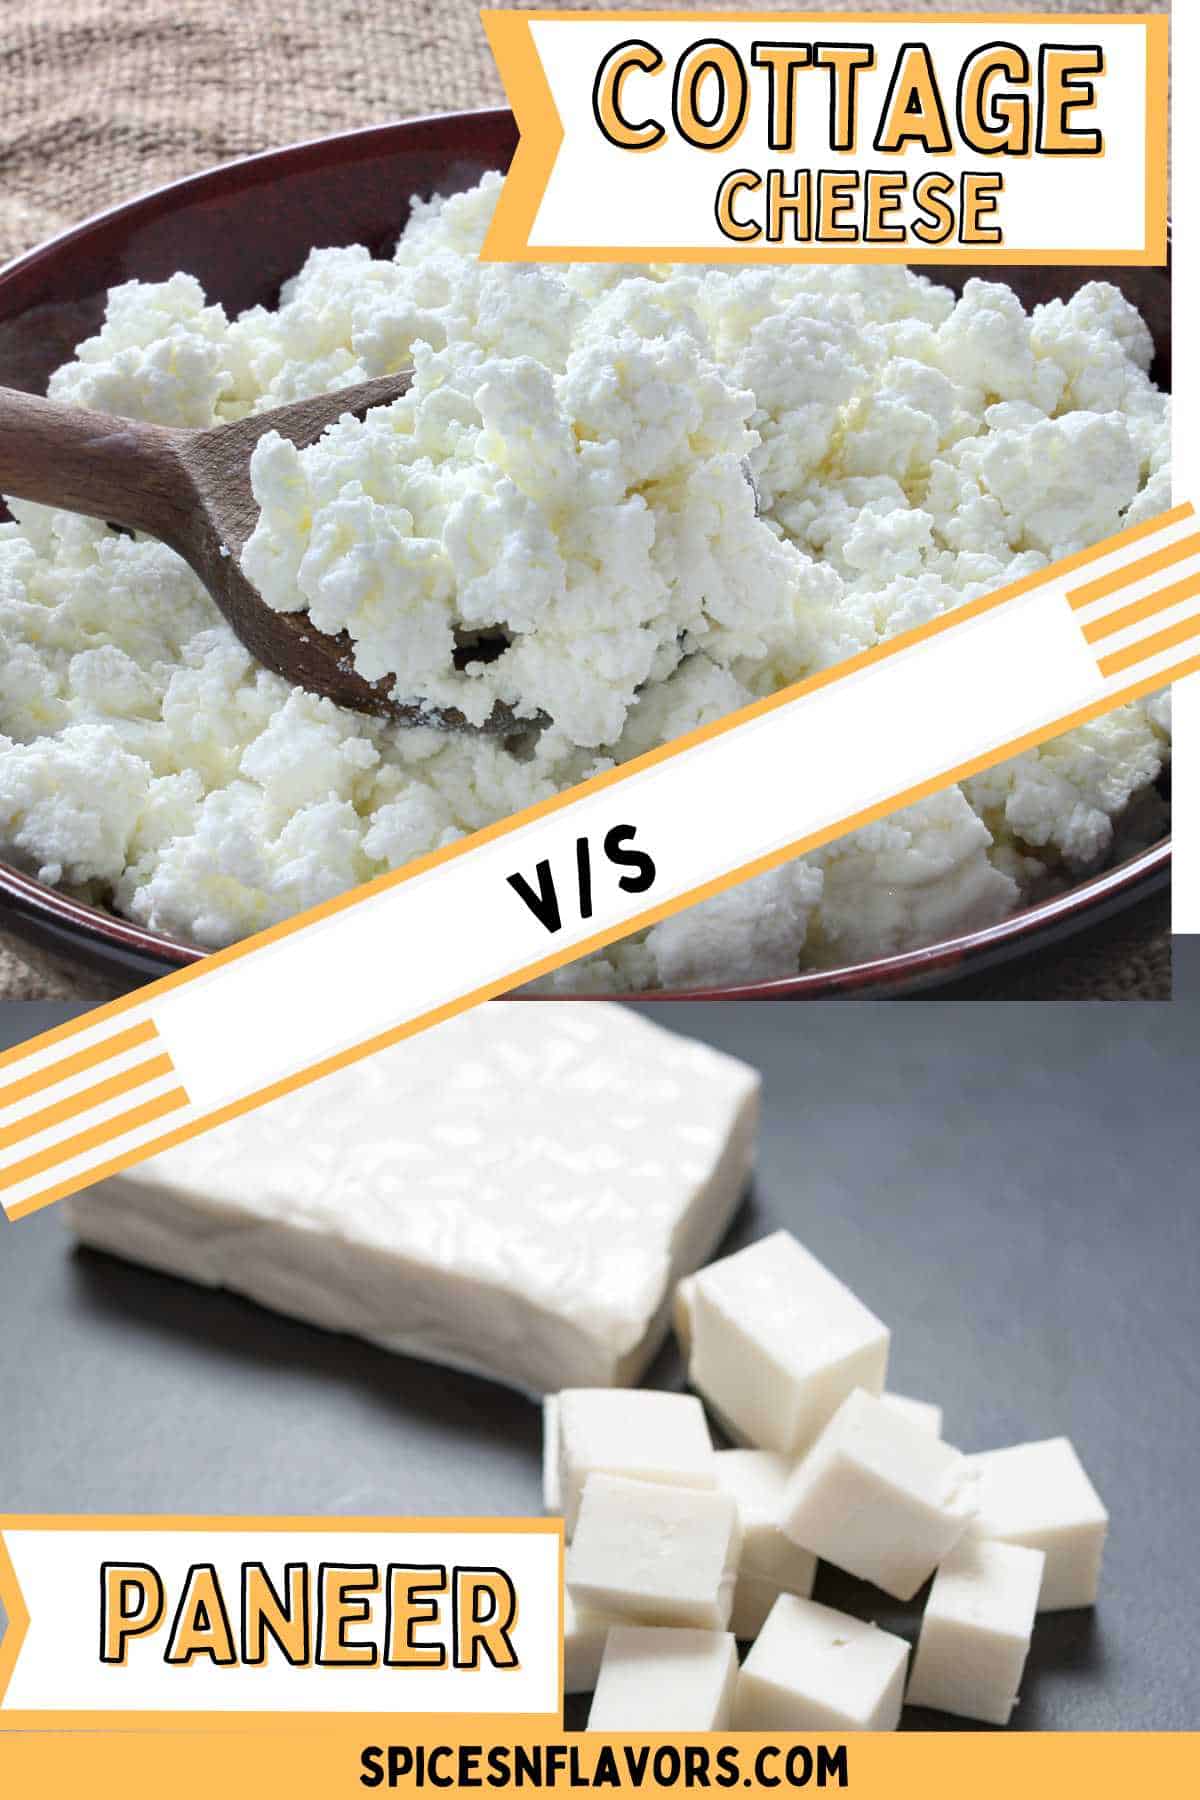 Can I use cottage cheese instead of paneer?